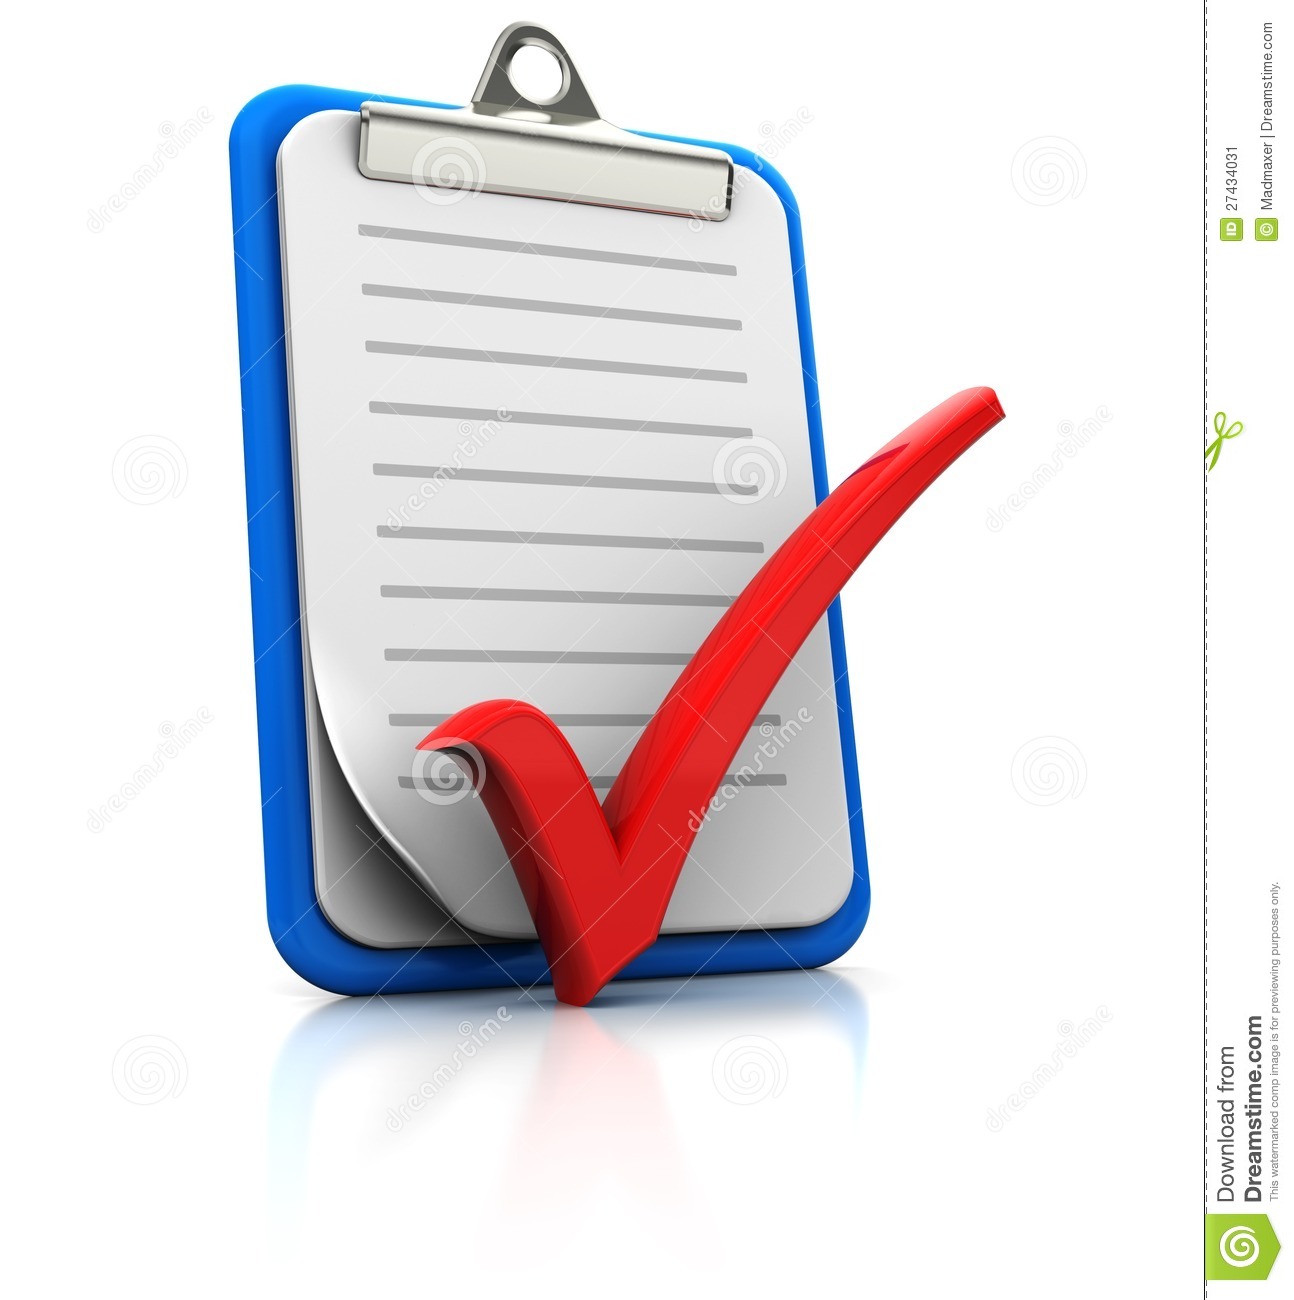 Checkmark Board Clipart Clipboard With Checkmark On